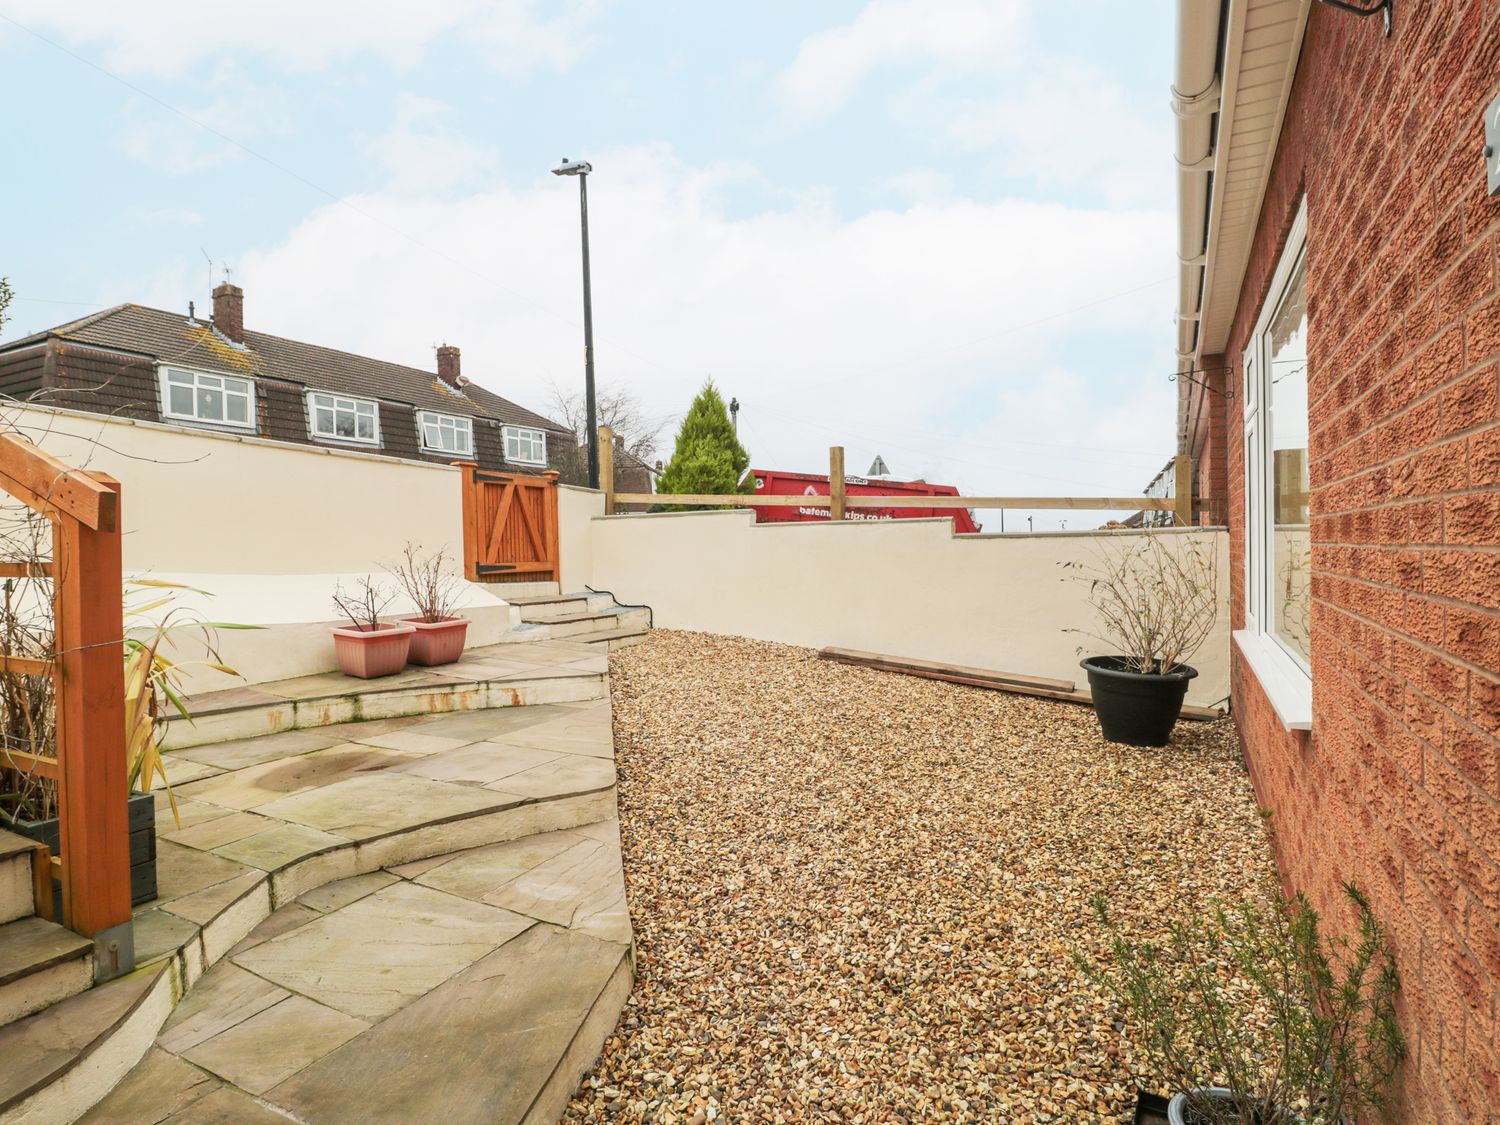 24 Severn Road, Portishead, Somerset. Enclosed patio garden with furniture and hot tub. TV and WiFi.